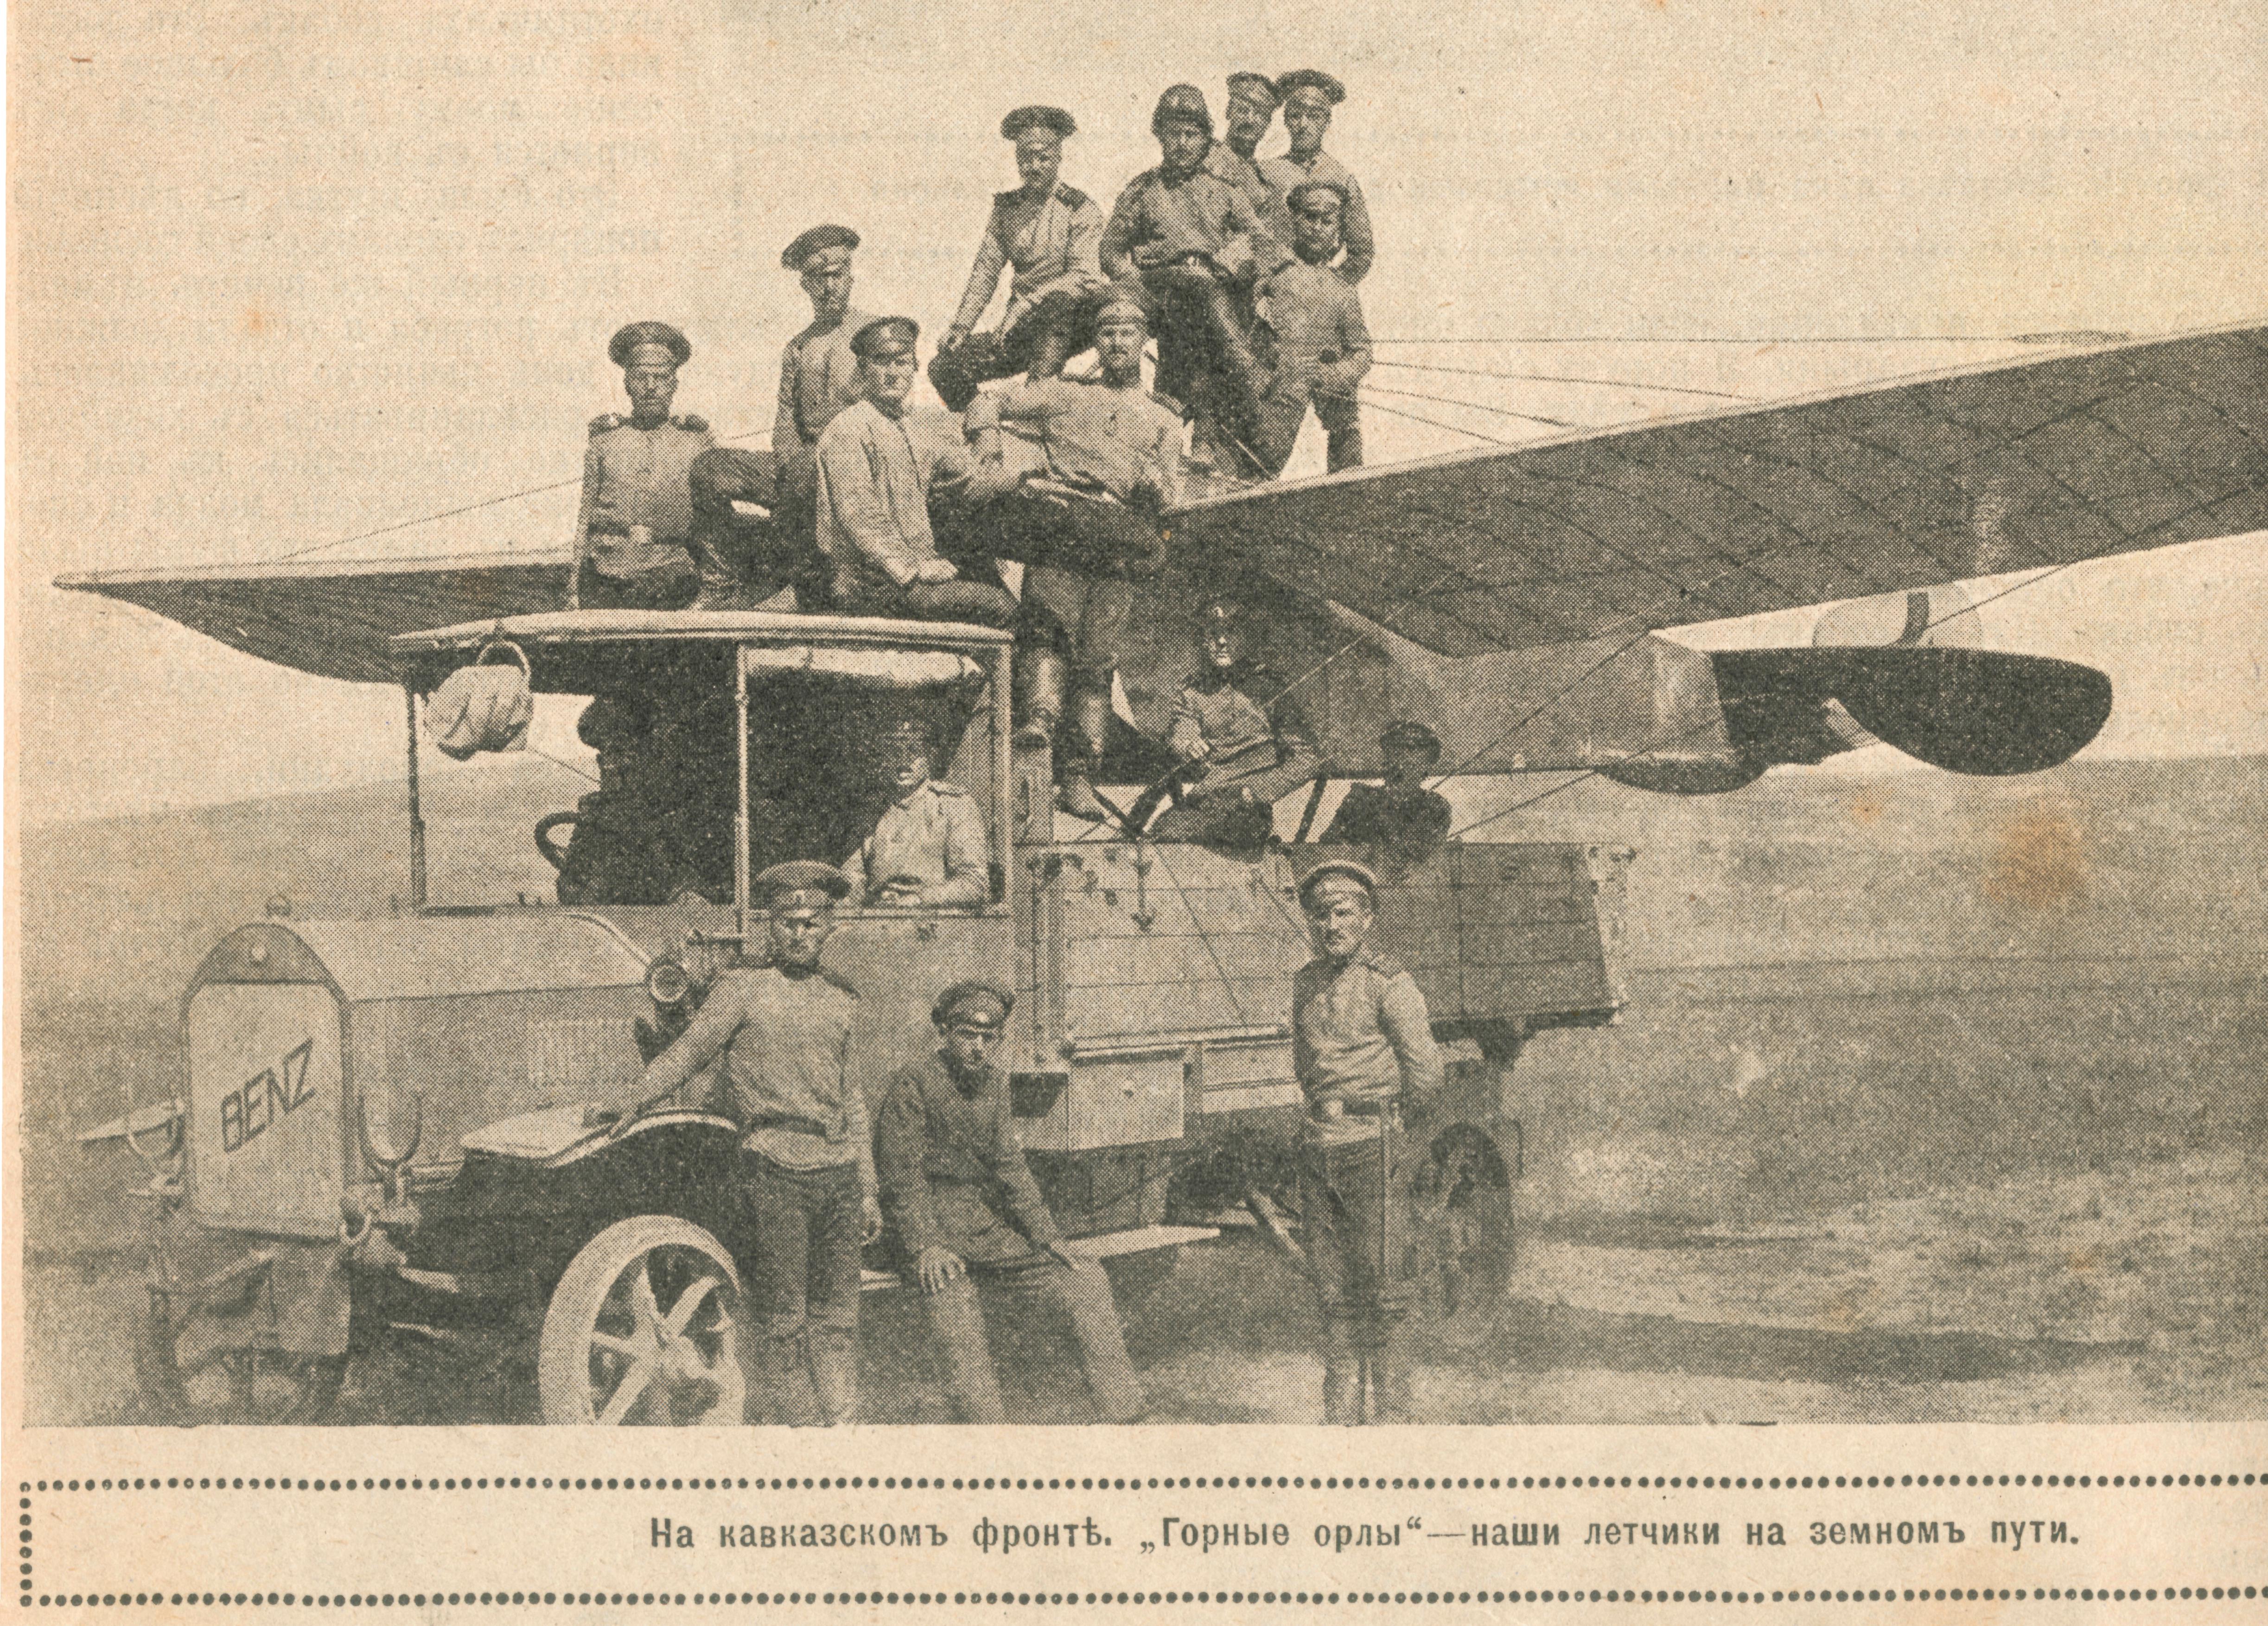 The_plane_in_a_truck._Russians_on_the_Caucasian_front._Summer_1916.jpg